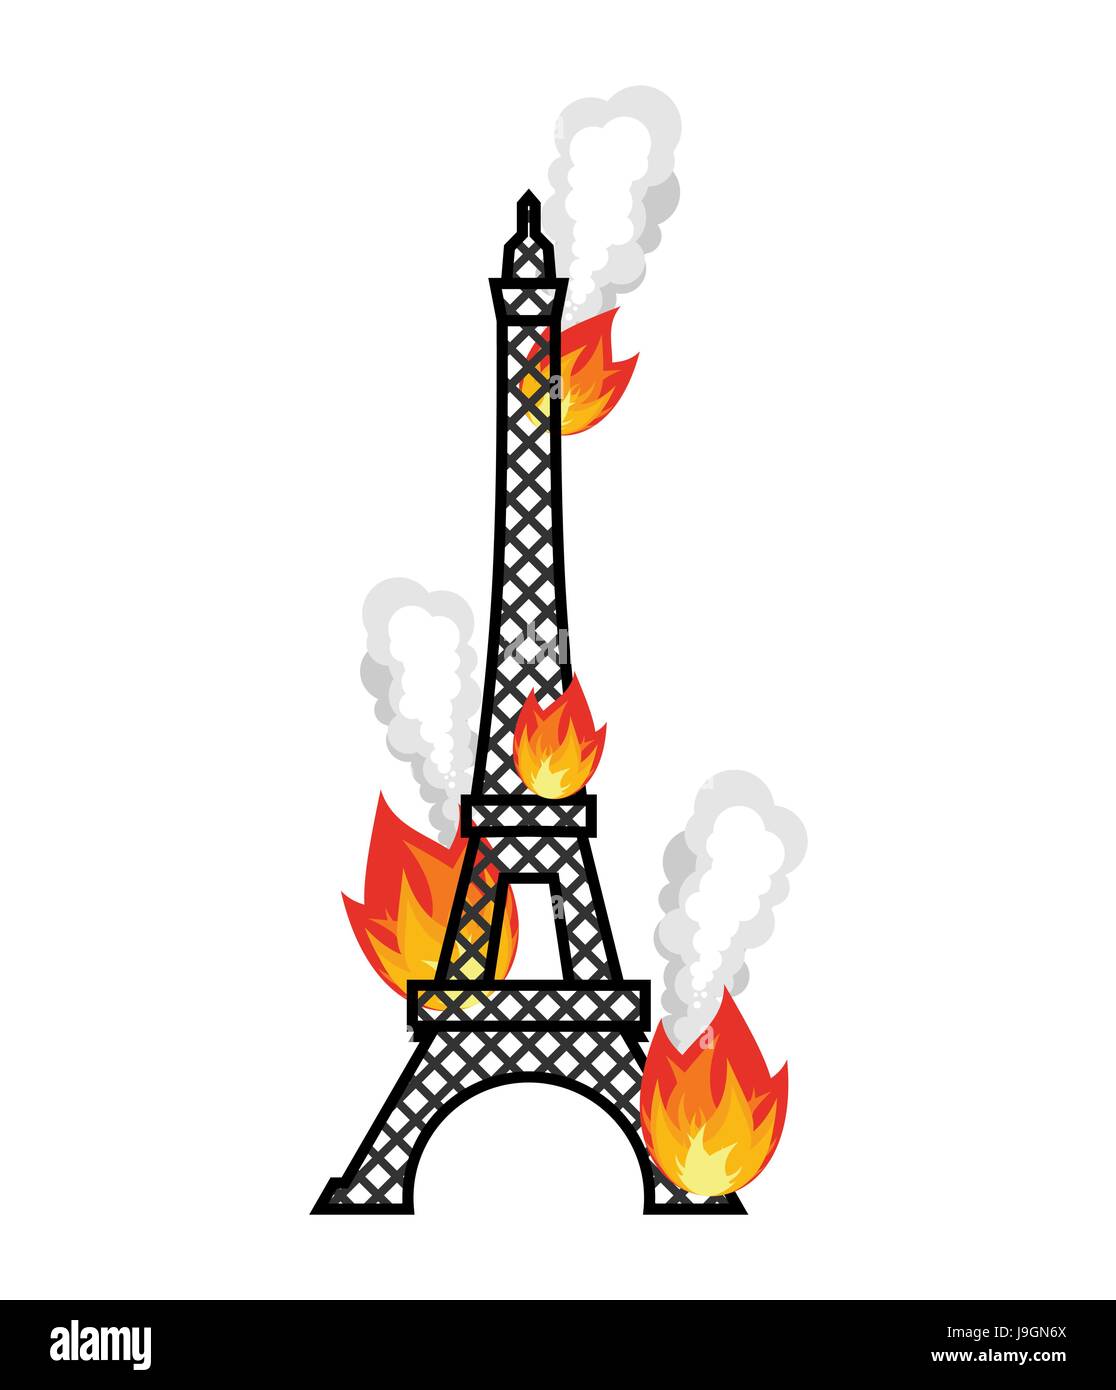 Eiffel Tower fire. Flame in Paris. Disaster Stock Vector